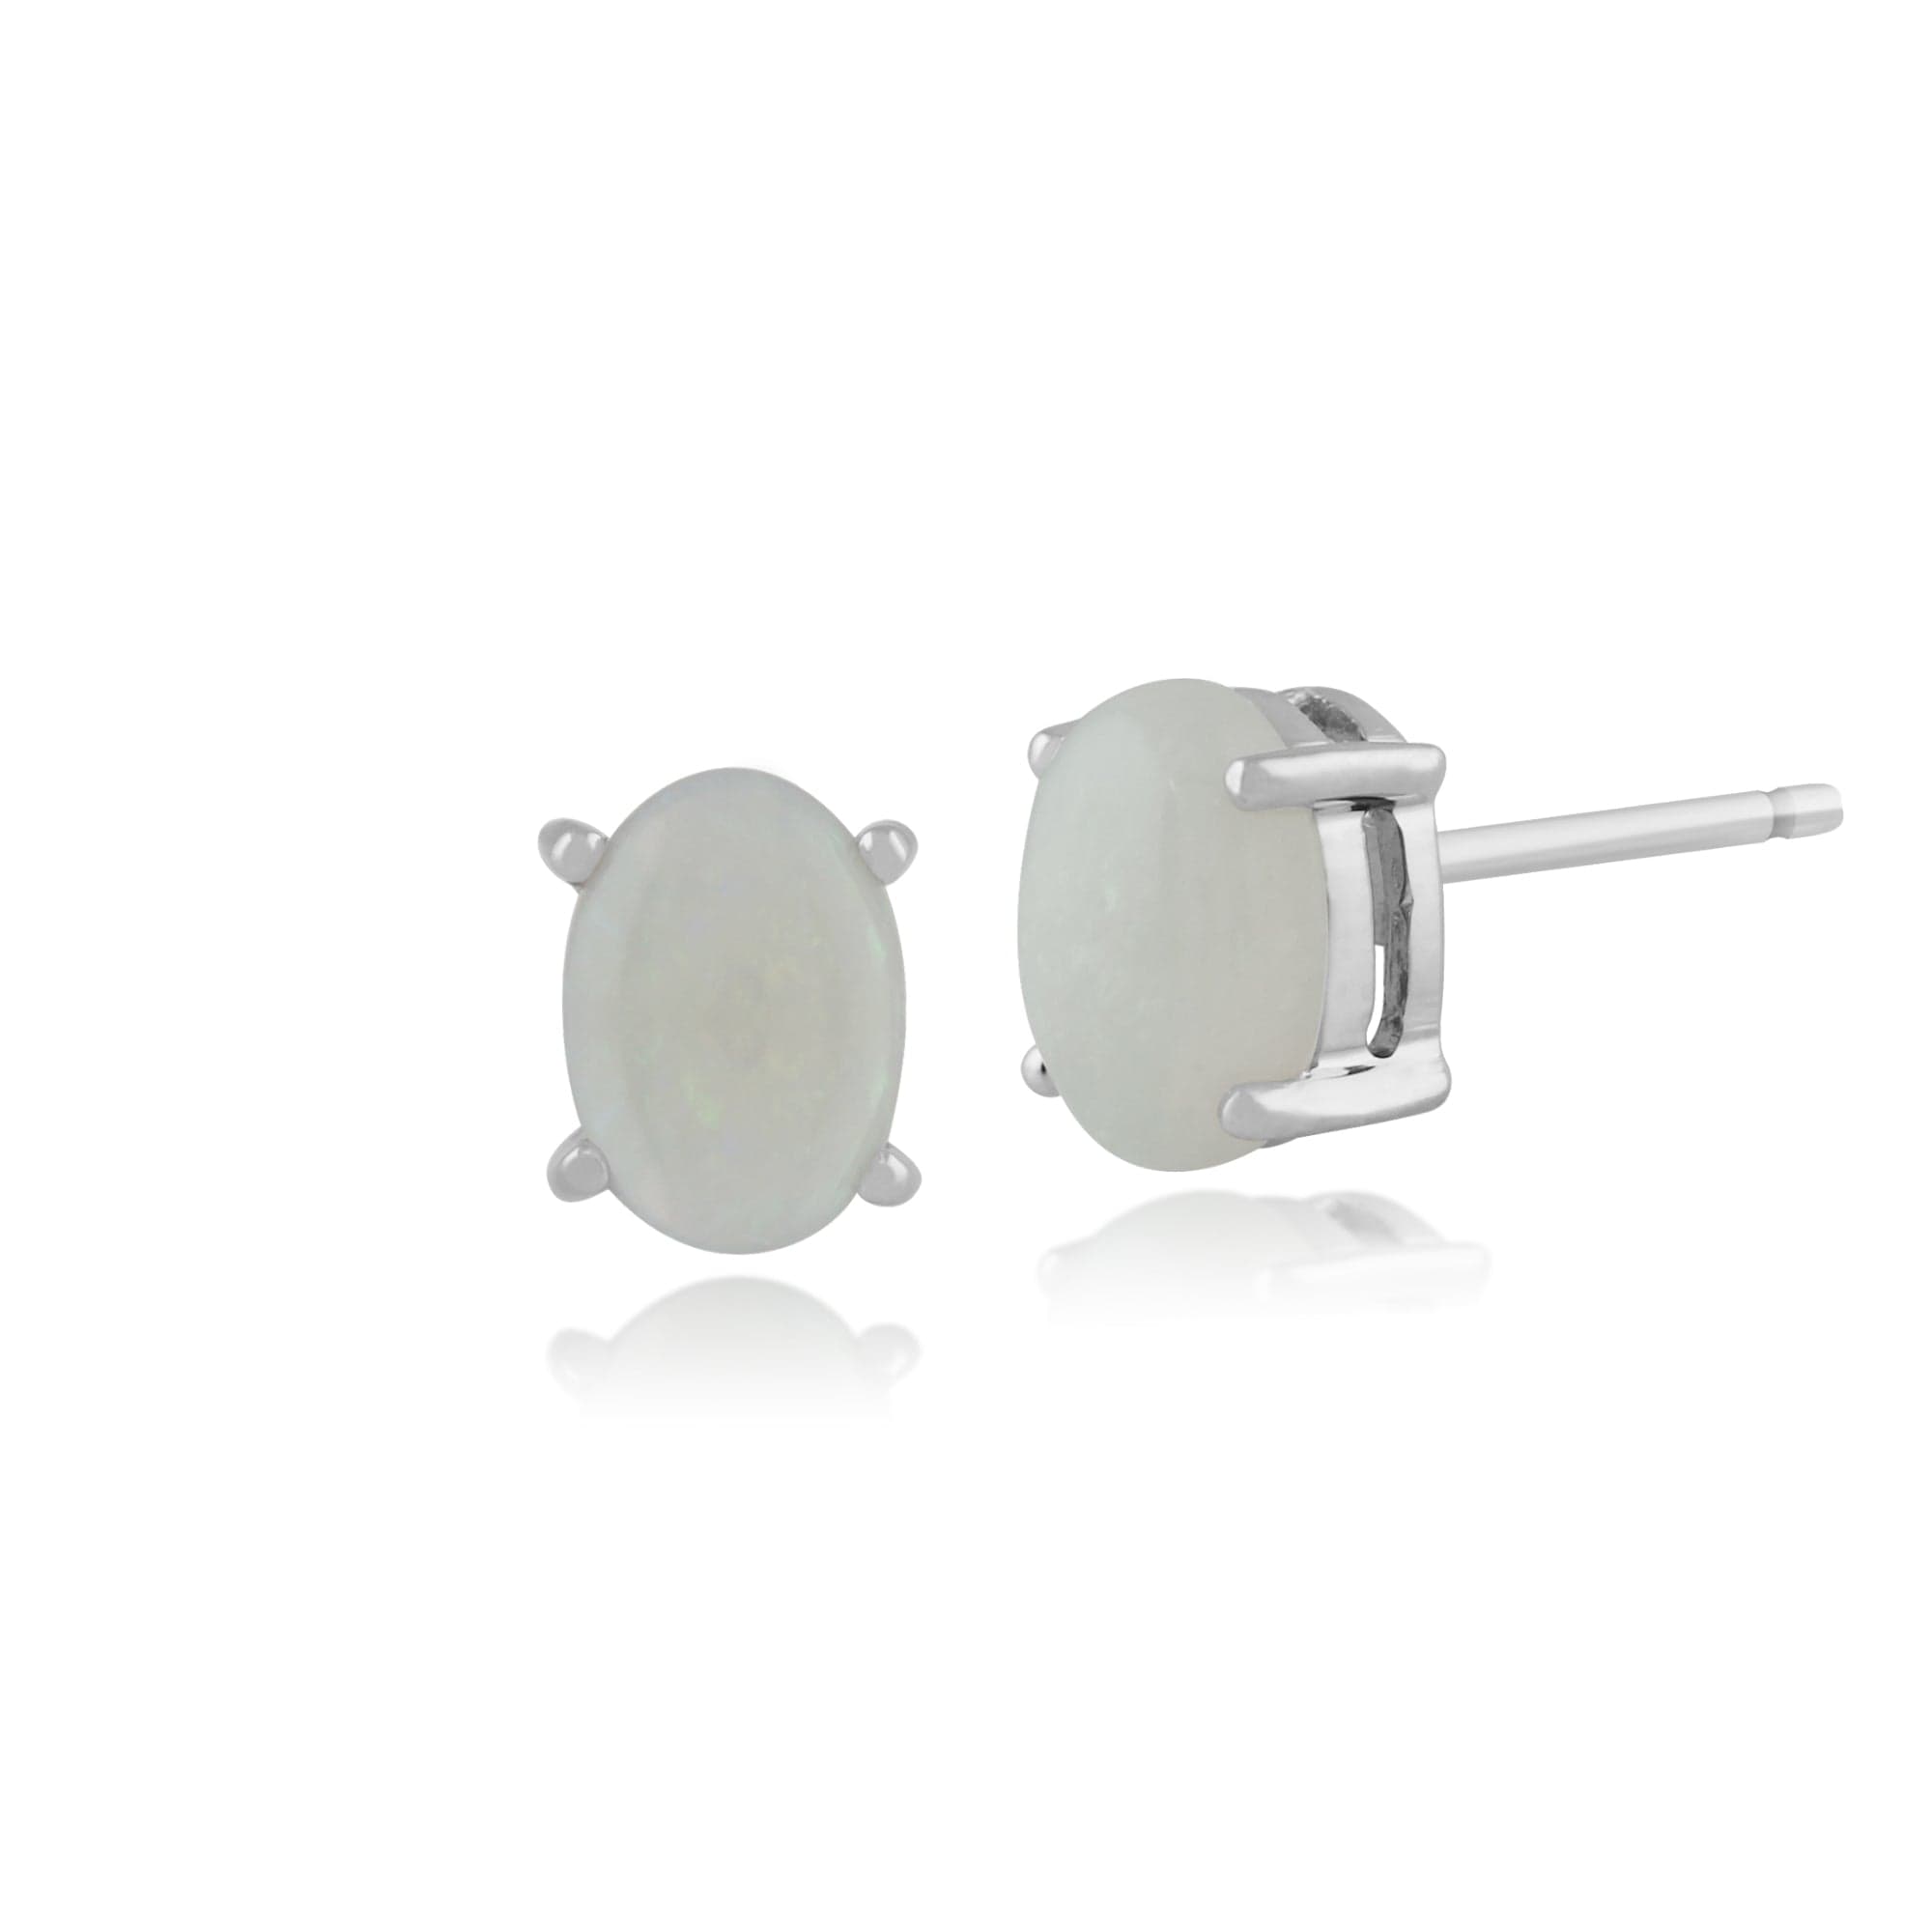 Classic Oval Opal Cabochon Stud Earrings in 9ct White Gold 7x5mm - Gemondo